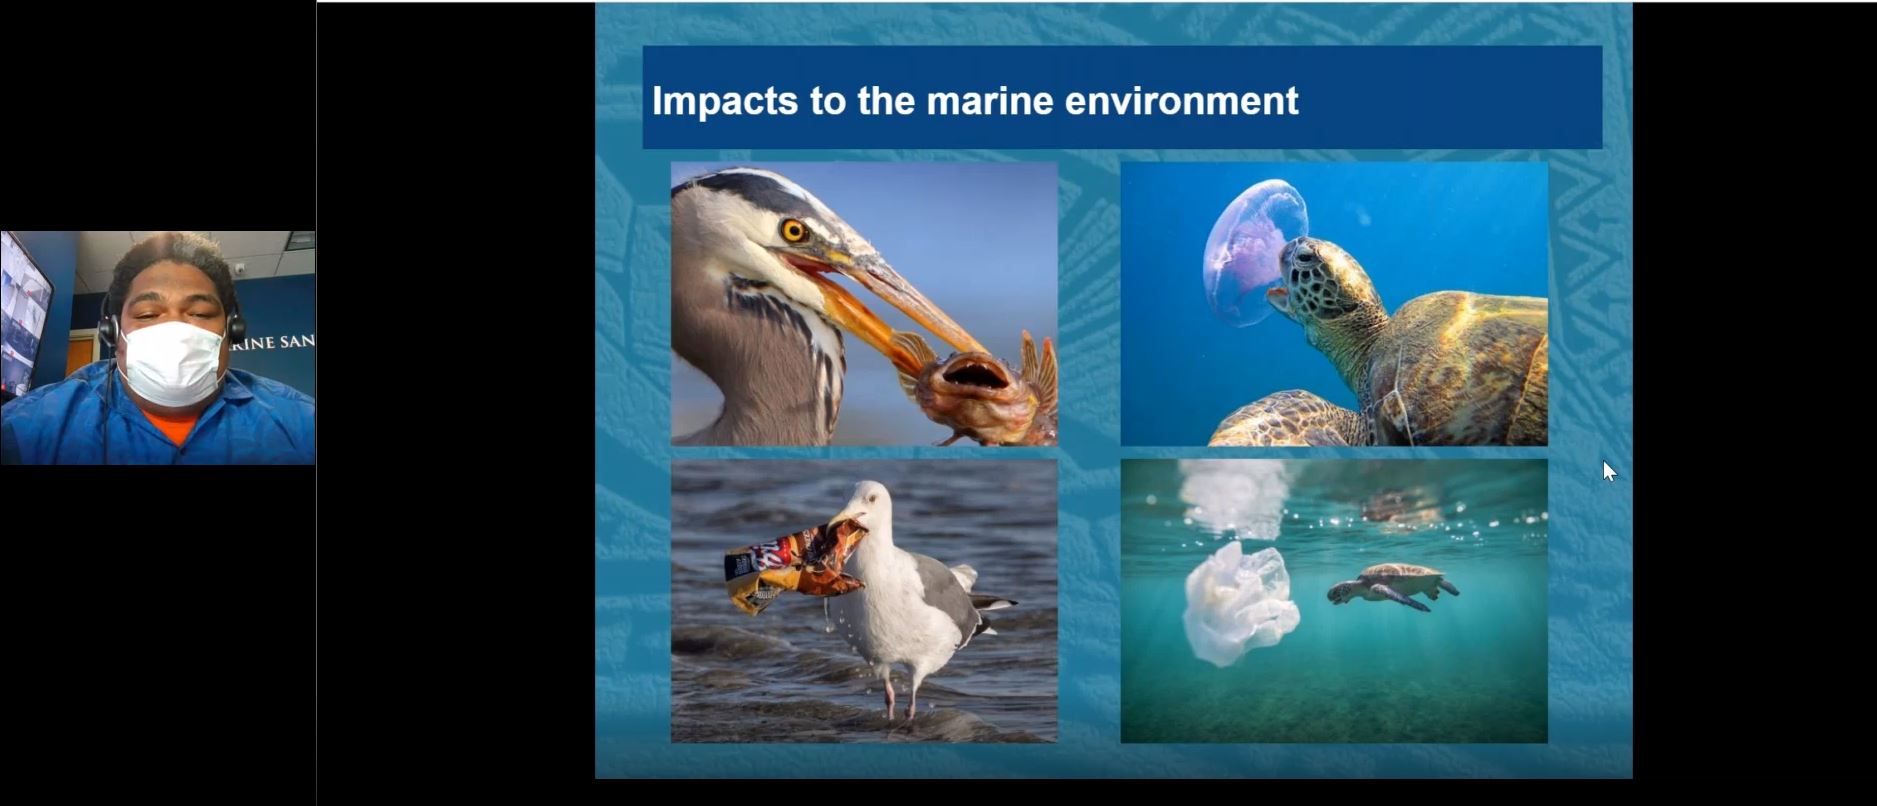 A screenshot of a webinar that shows Iosefa Siatuu on camera wearing a mask. The screen is showing a presentation slide that says, "Impacts to the marine environment" with a picture of a bird eating a fish paired above a picture of a bird eating a plastic chip bag, and a picture of a sea turtle eating a jellyfish above a picture of a sea turtle near a plastic grocery bag that resembles a jellyfish. 